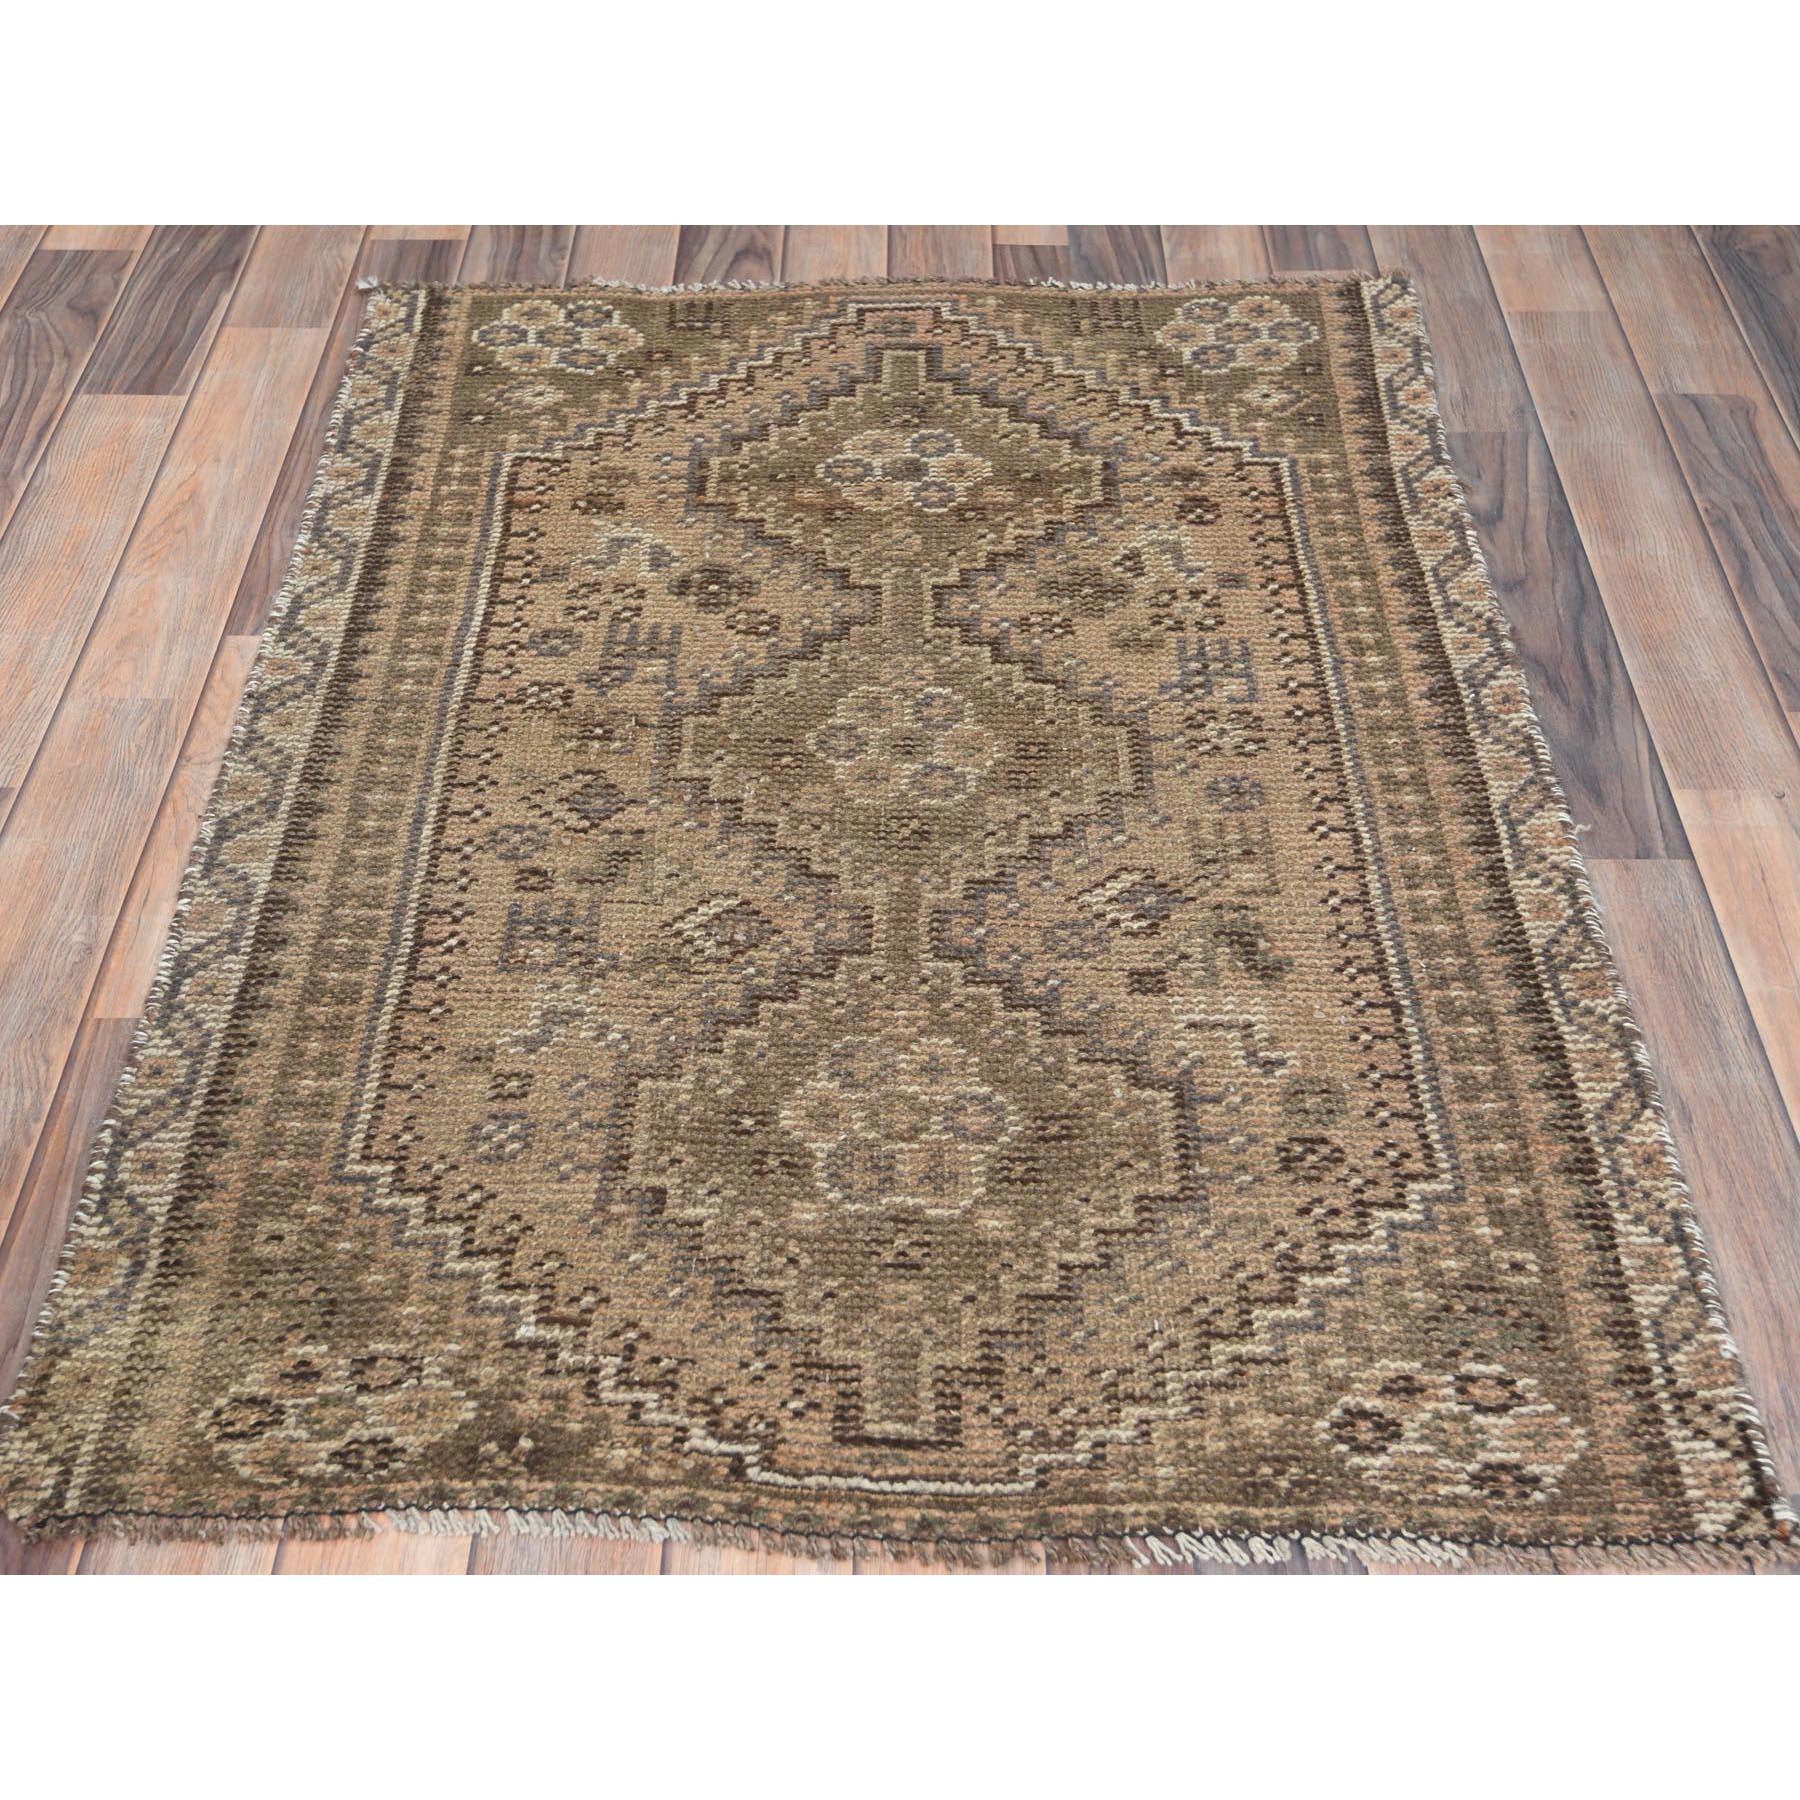 This fabulous hand-knotted carpet has been created and designed for extra strength and durability. This rug has been handcrafted for weeks in the traditional method that is used to make
Exact Rug Size in Feet and Inches : 3'0